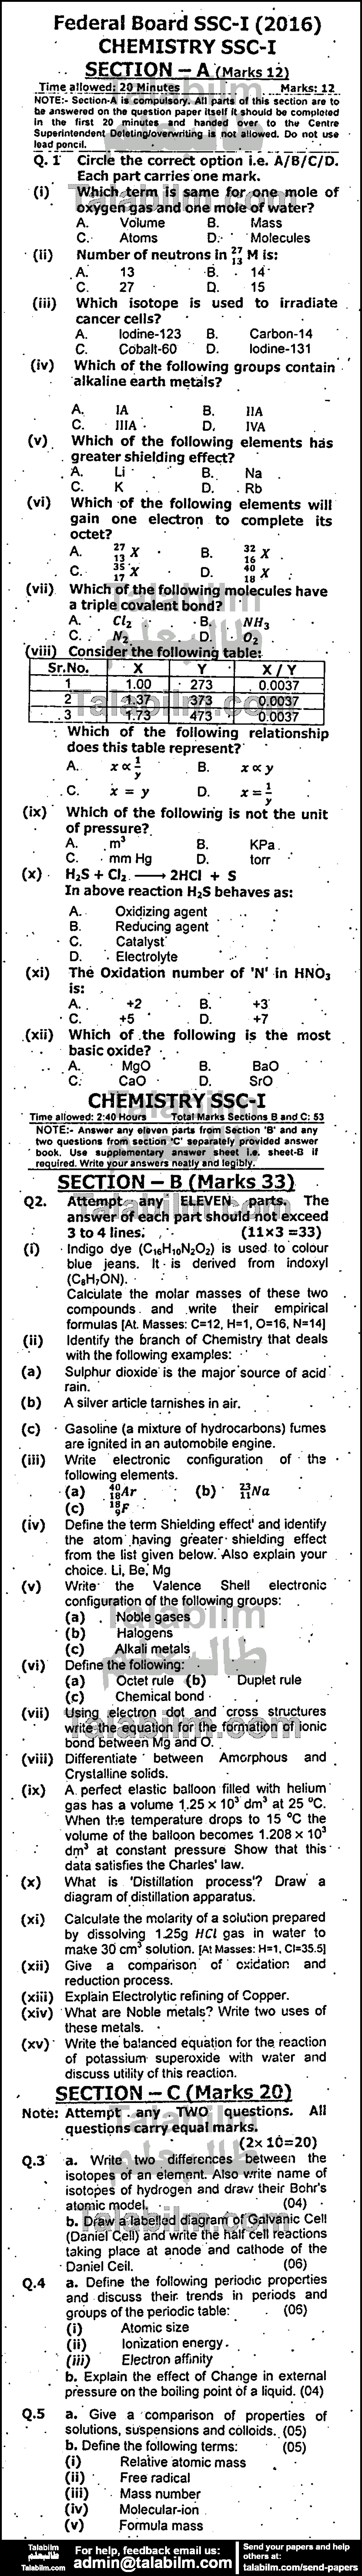 Chemistry 0 past paper for 2016 Group-I